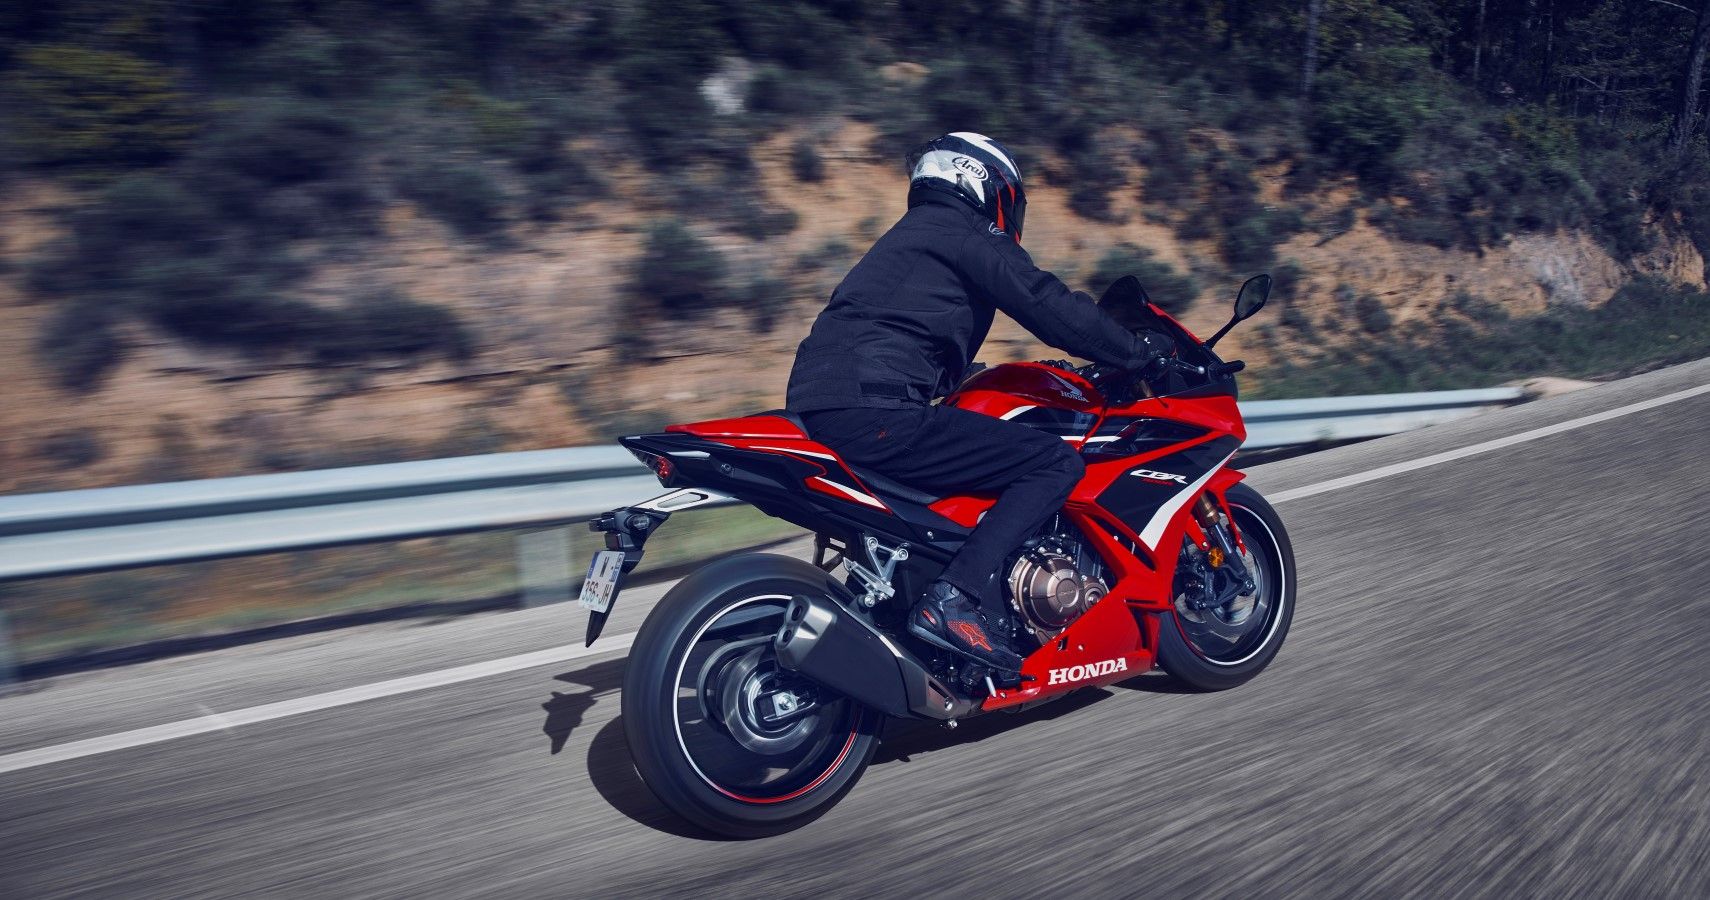 The Baby Blade: Everything You Need To Know About The 2022 Honda CBR500R